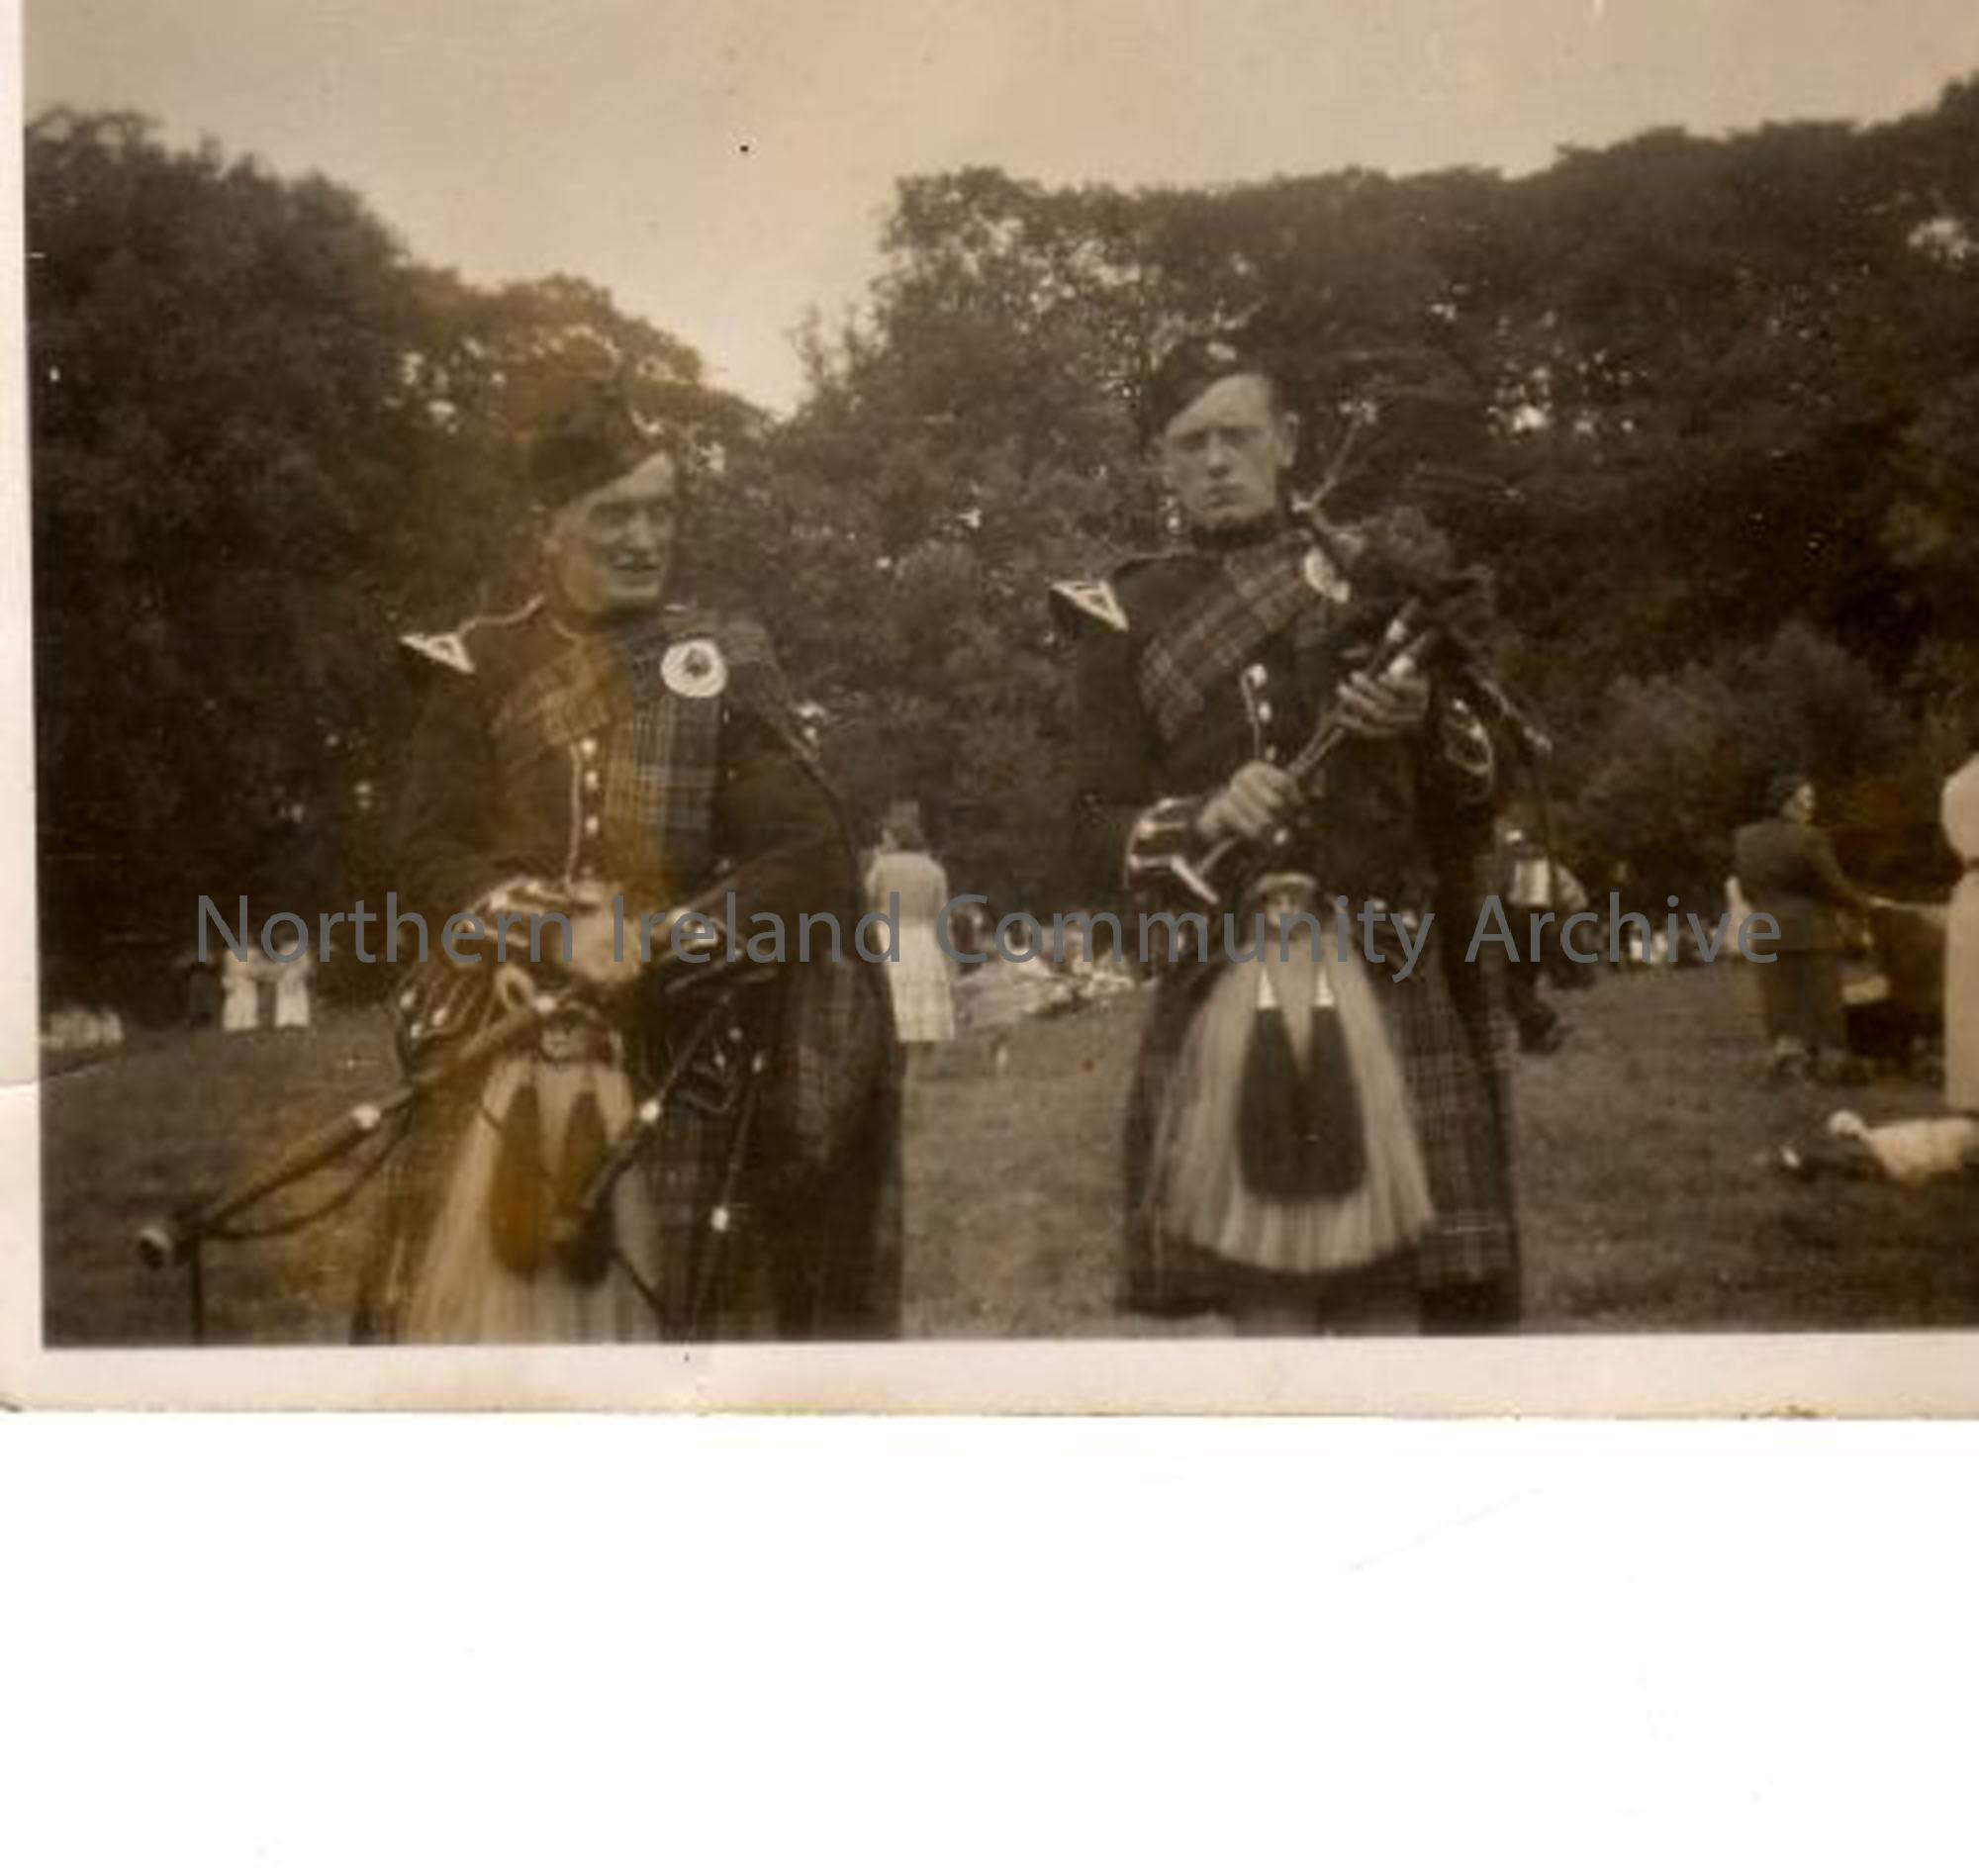 Two men with bagpipes, twelth of July. They are part of Greenhills Pipe Band from Ballymoney. Sammy Wade went on to raise a family of pipers while Ernie McLernon emigrated as a ten pounds pom to Australia and has since settled in New Zealand. (3084)